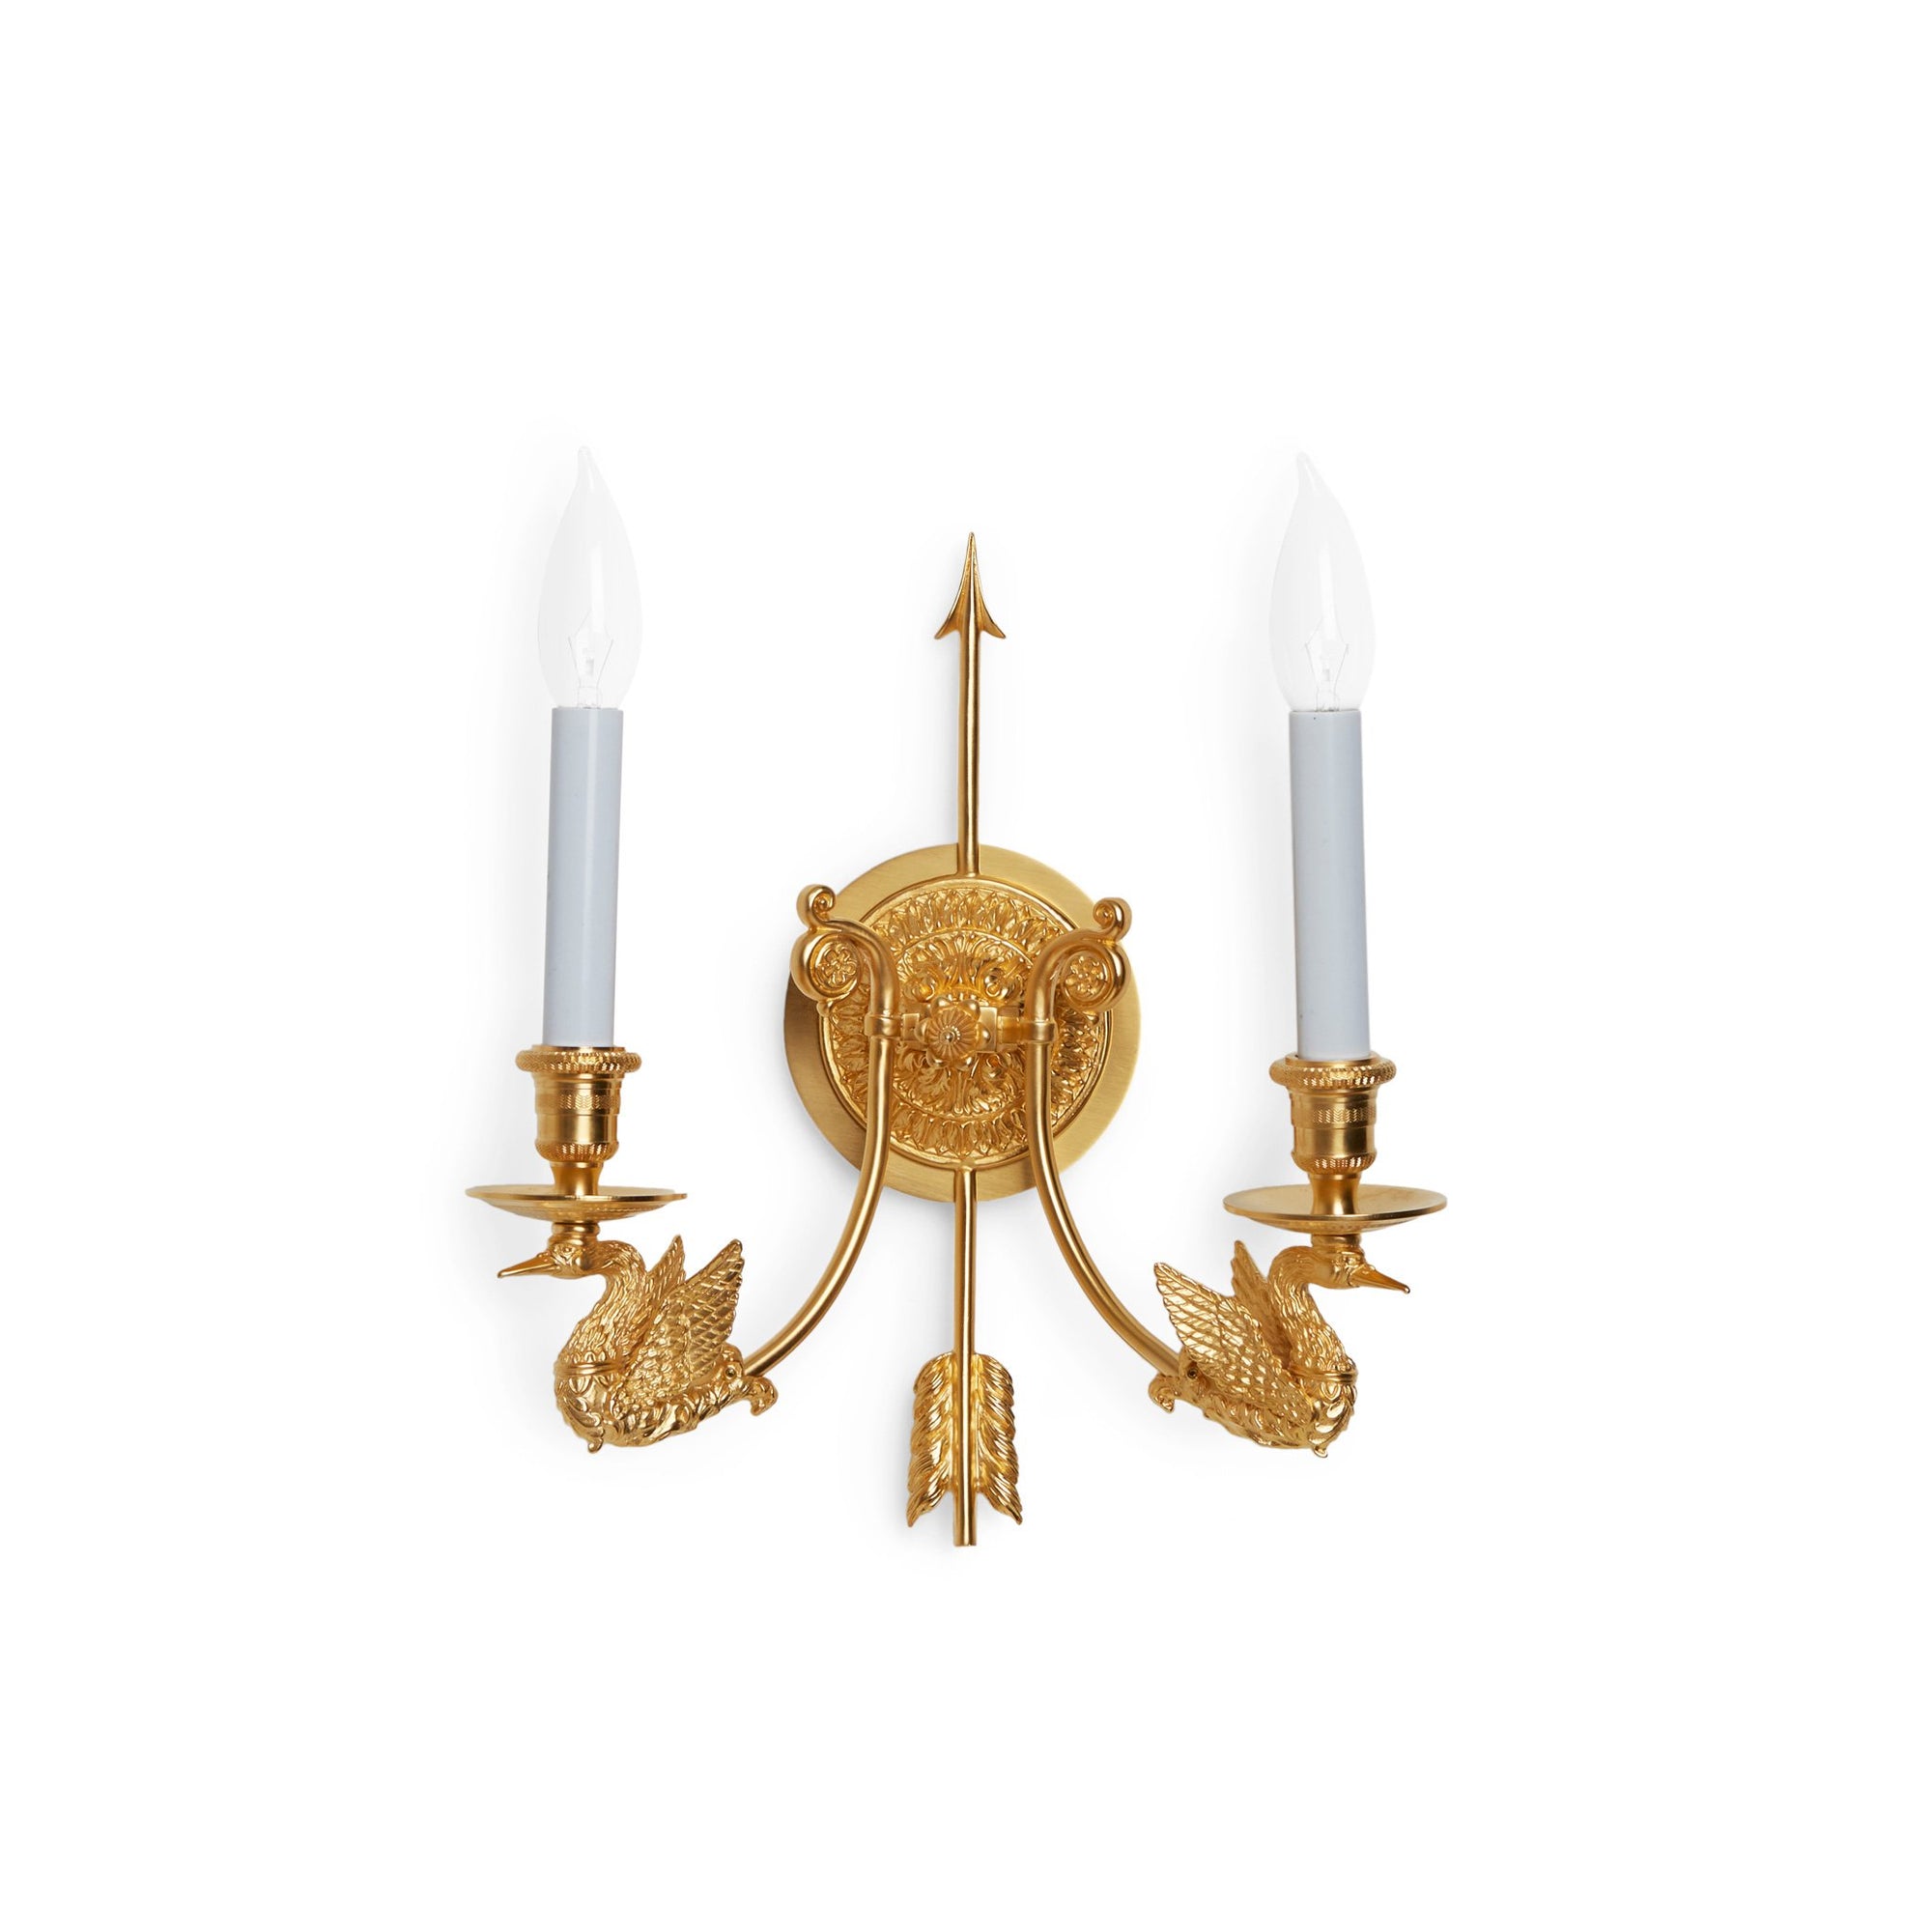 7109-GP Sherle Wagner International Swan Double Arm Sconce in Gold Plate